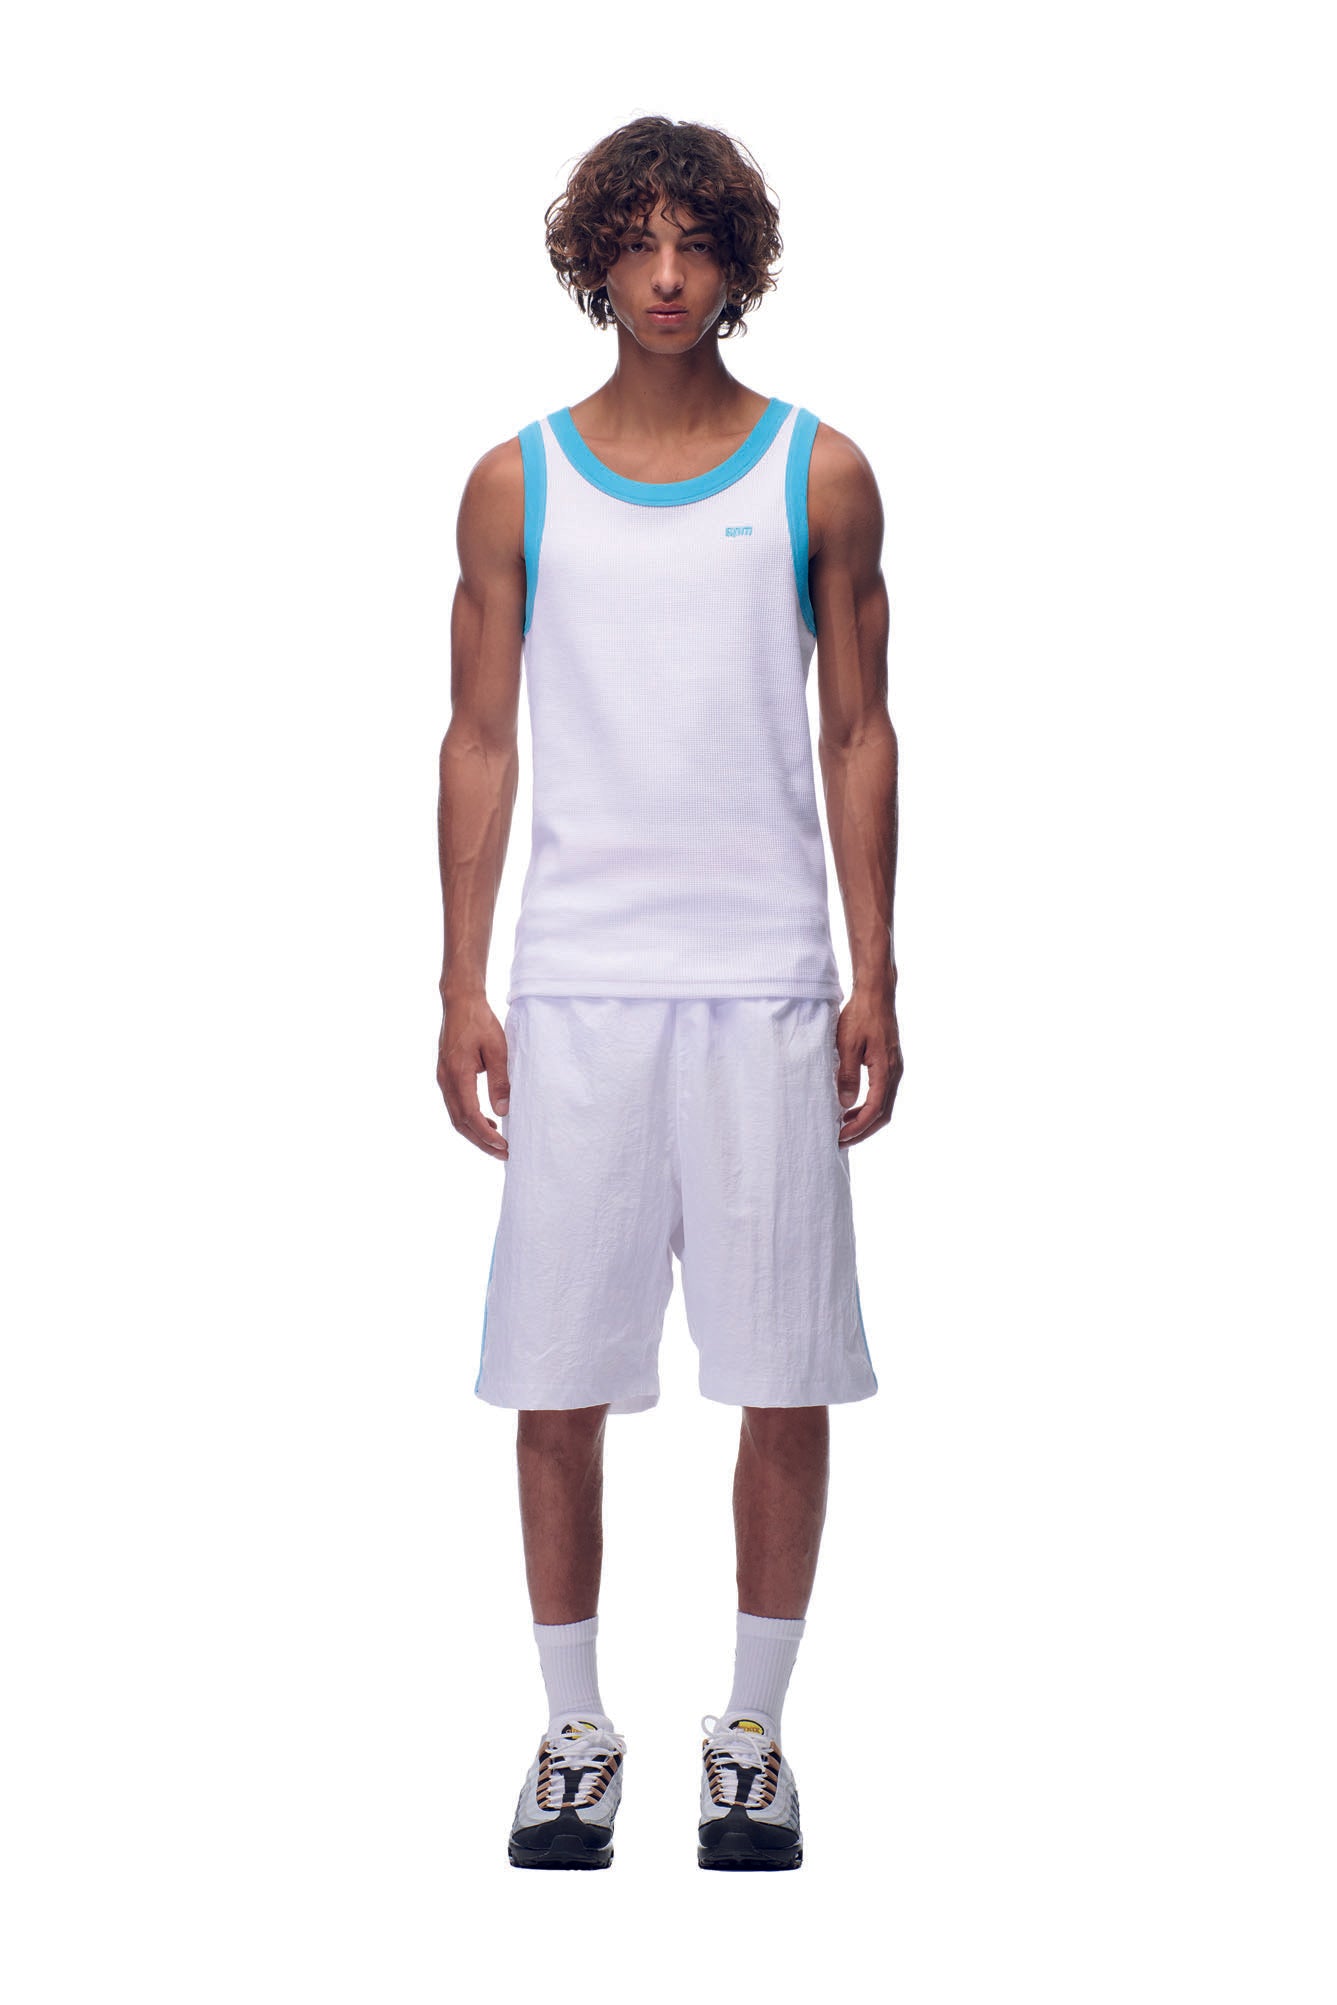 The Tank Top - Baby Blue